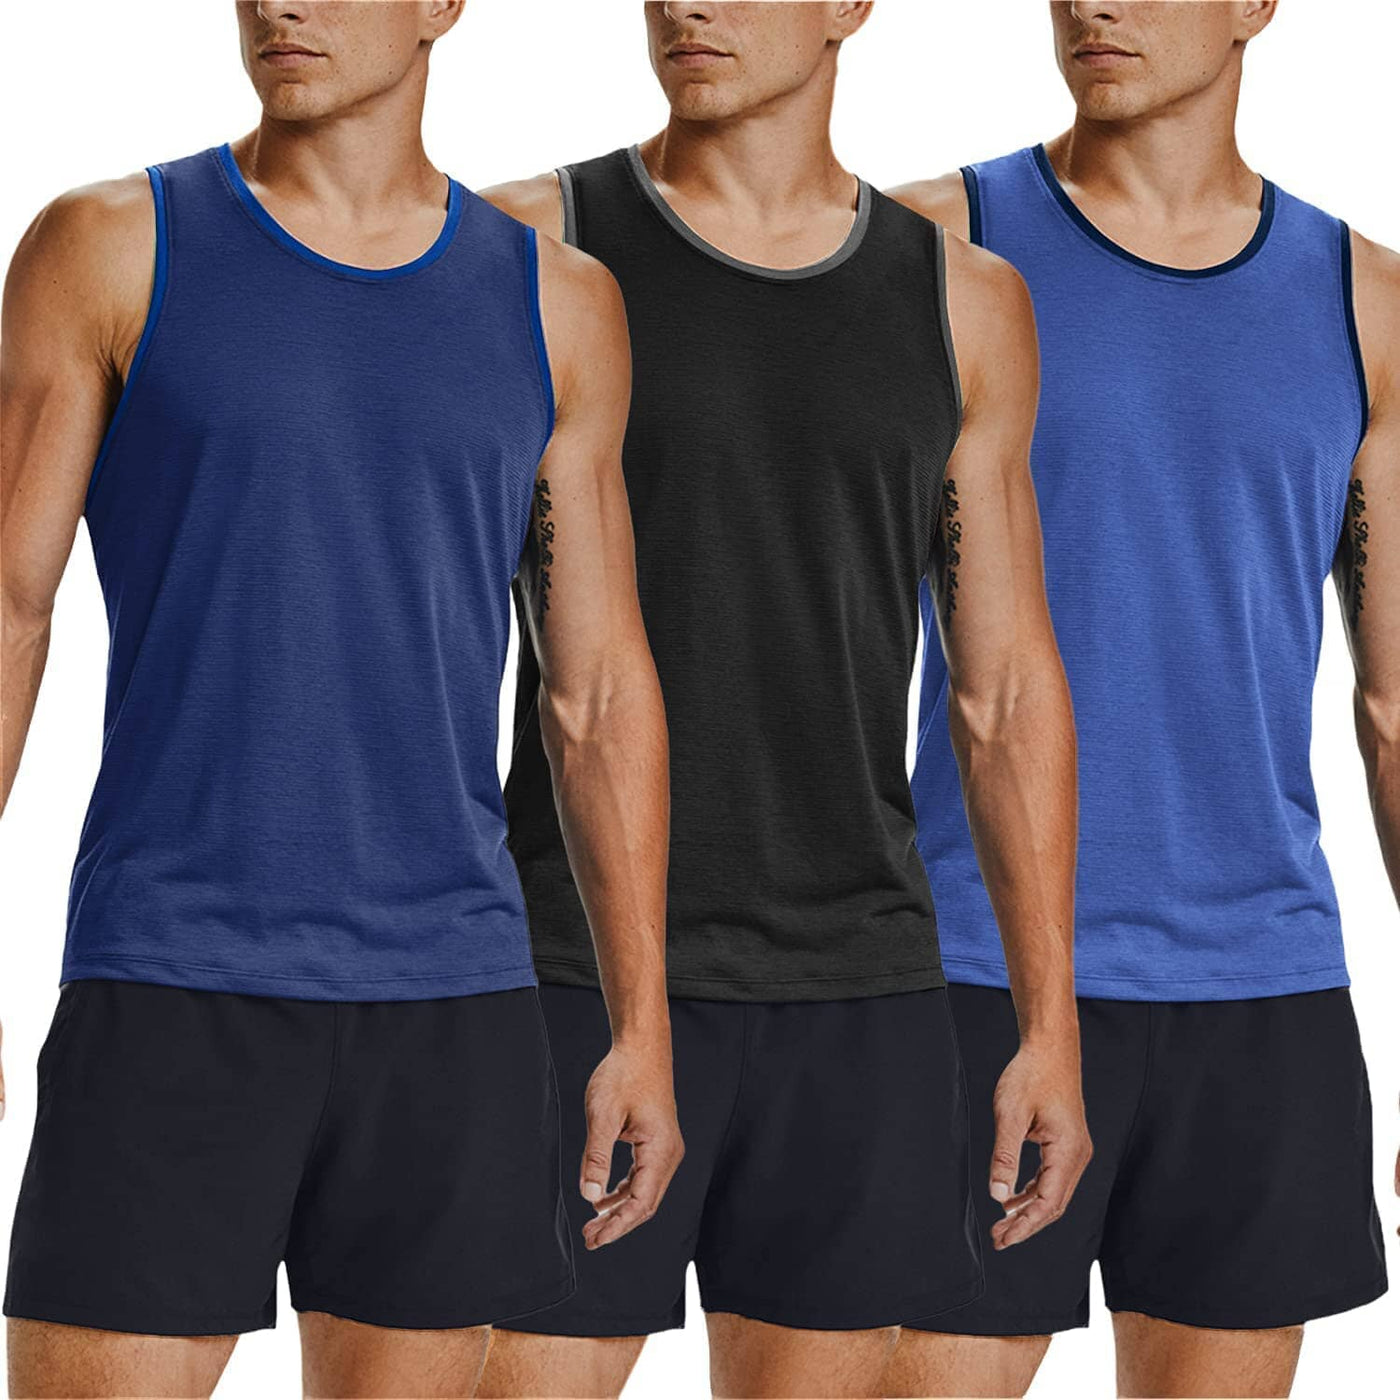 Coofandy Gym Tank Top 3 Pack Shirts (US Only) Tank Tops coofandy 